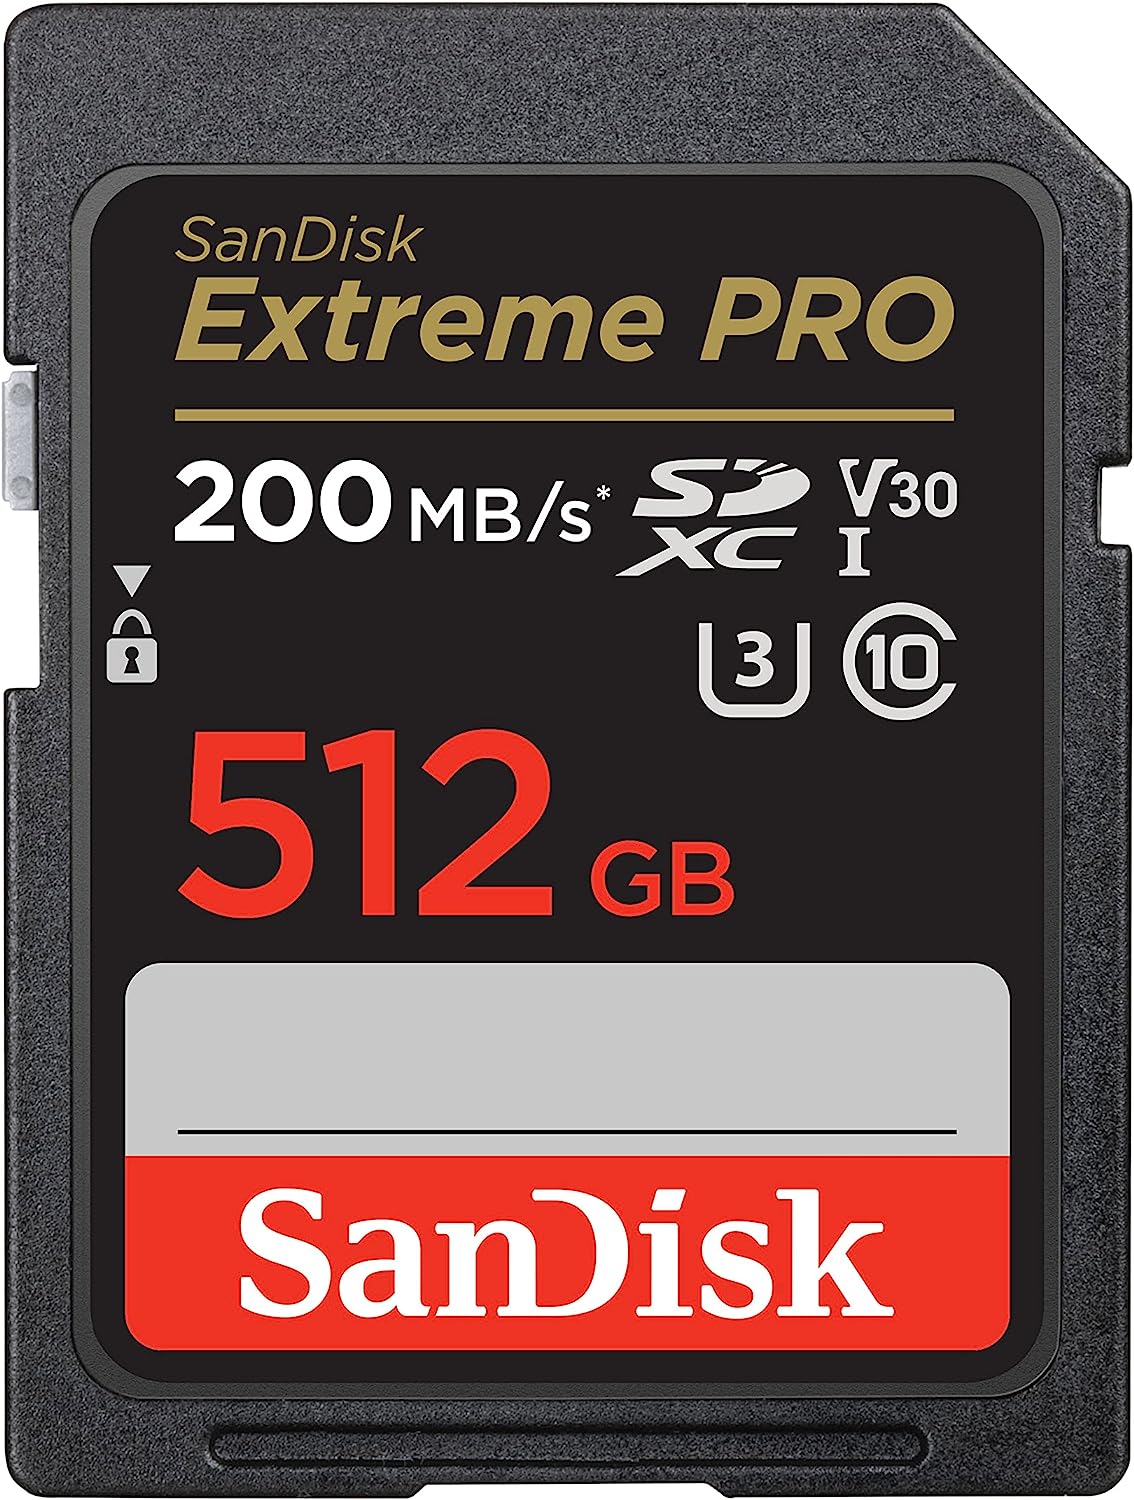 SanDisk 512GB Extreme PRO SDXC UHS-I Memory Card - C10, U3, V30, 4K UHD, SD Card - SDSDXXD-512G-GN4IN 512GB Memory Card Only